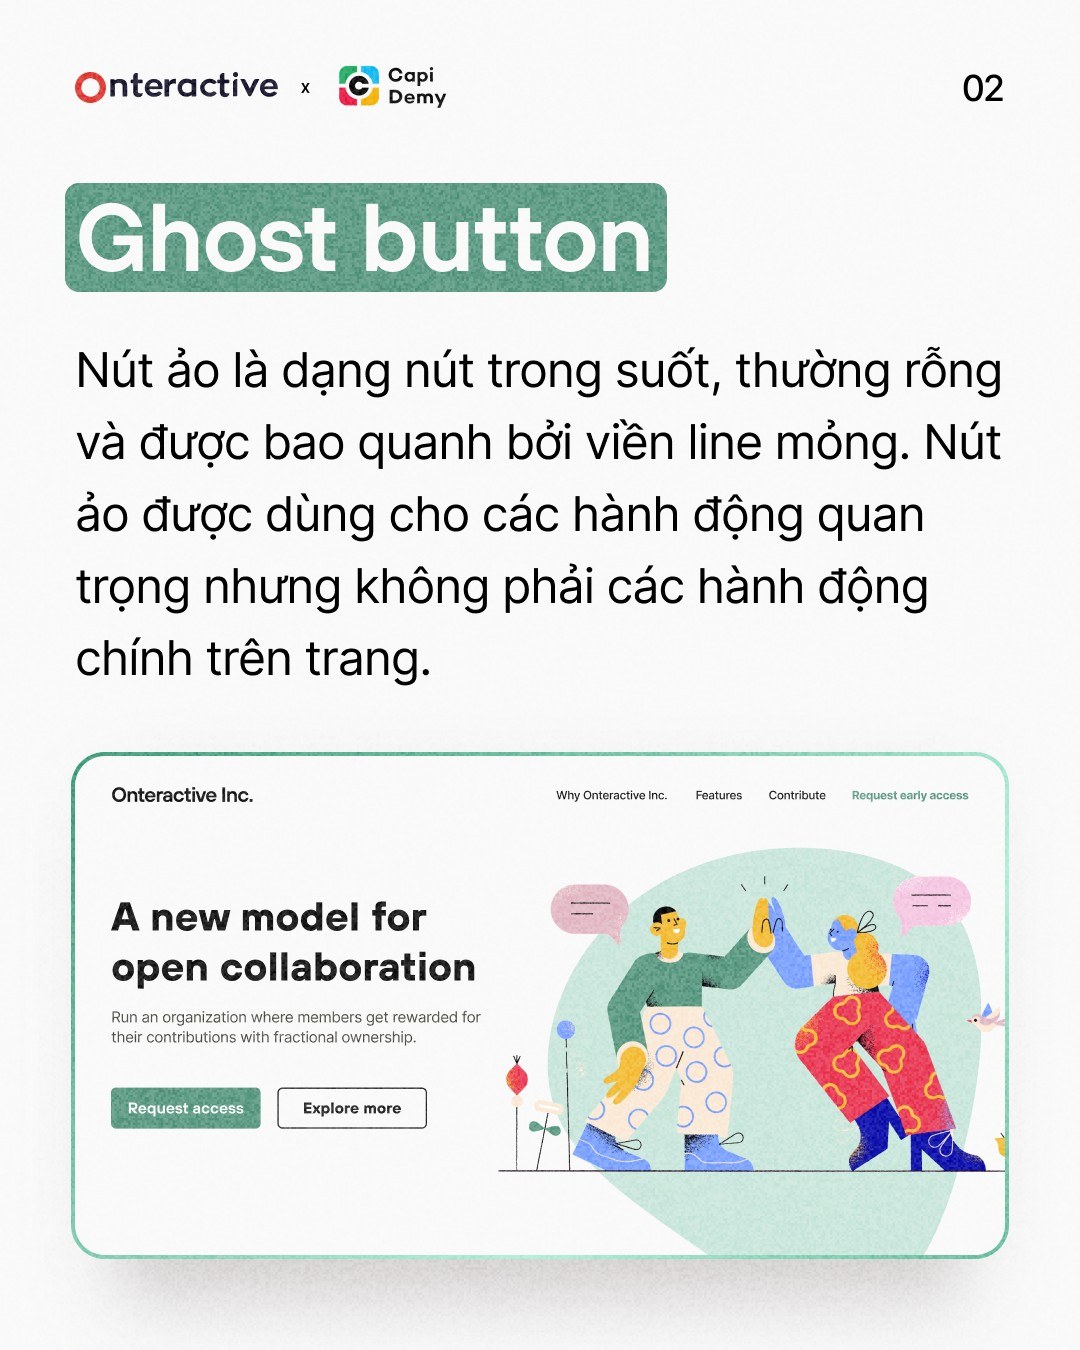 Ghost button